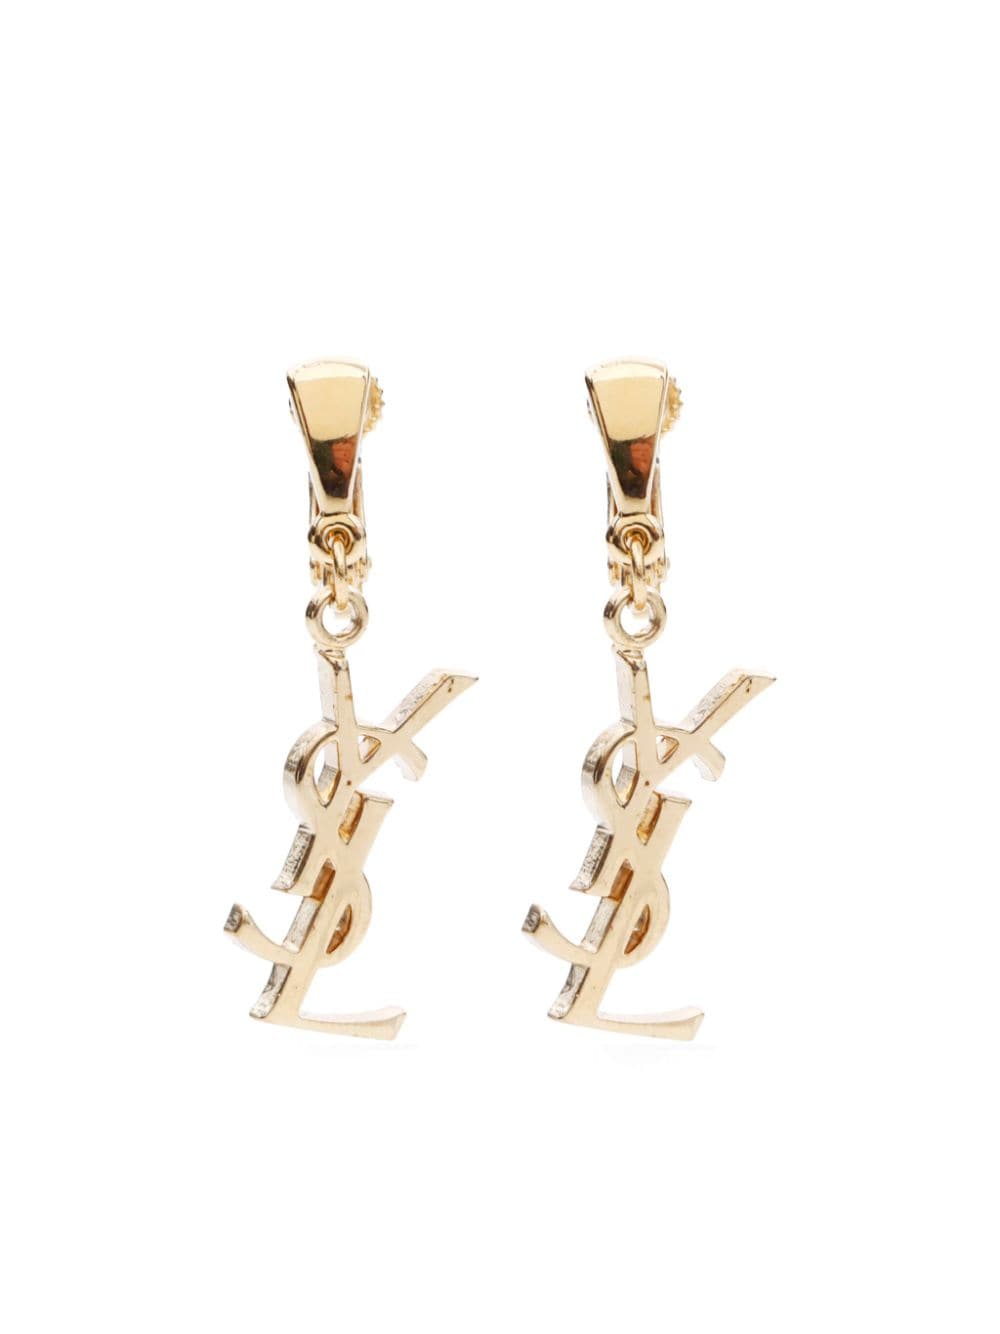 Saint Laurent Pre-Owned YSL Ohrclips mit Logo - Gold von Saint Laurent Pre-Owned